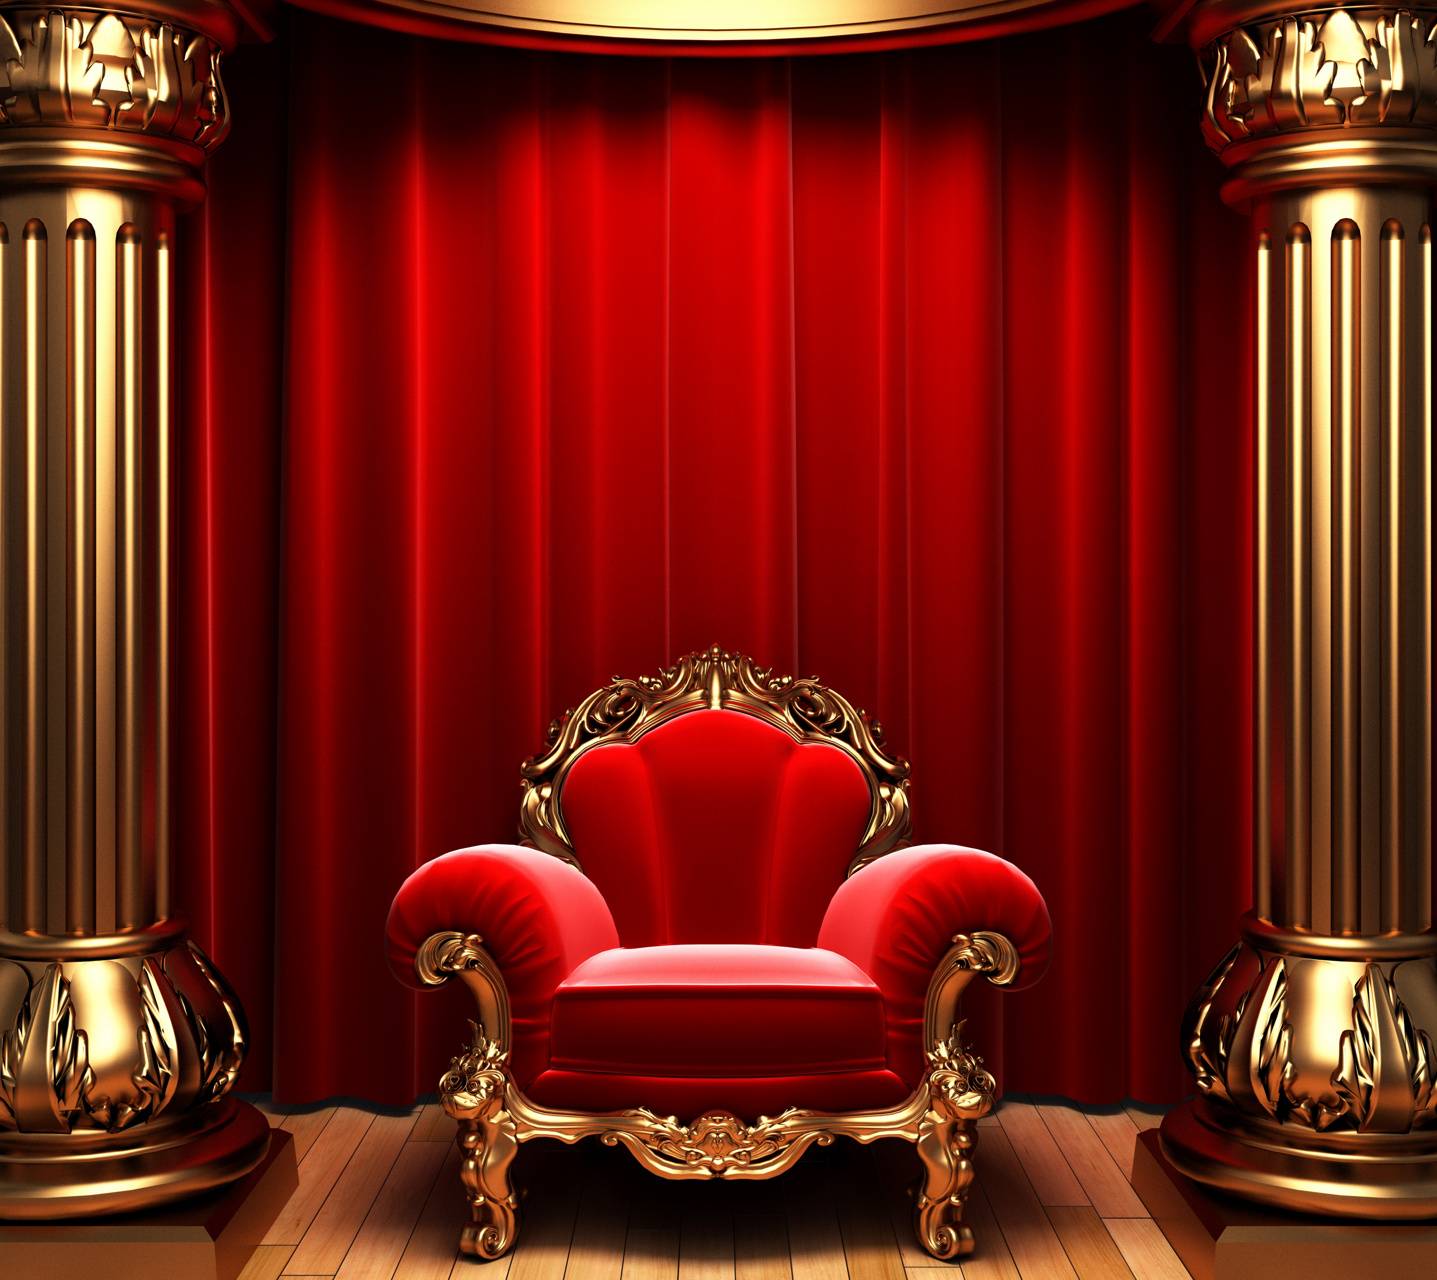 King Chair Wallpapers